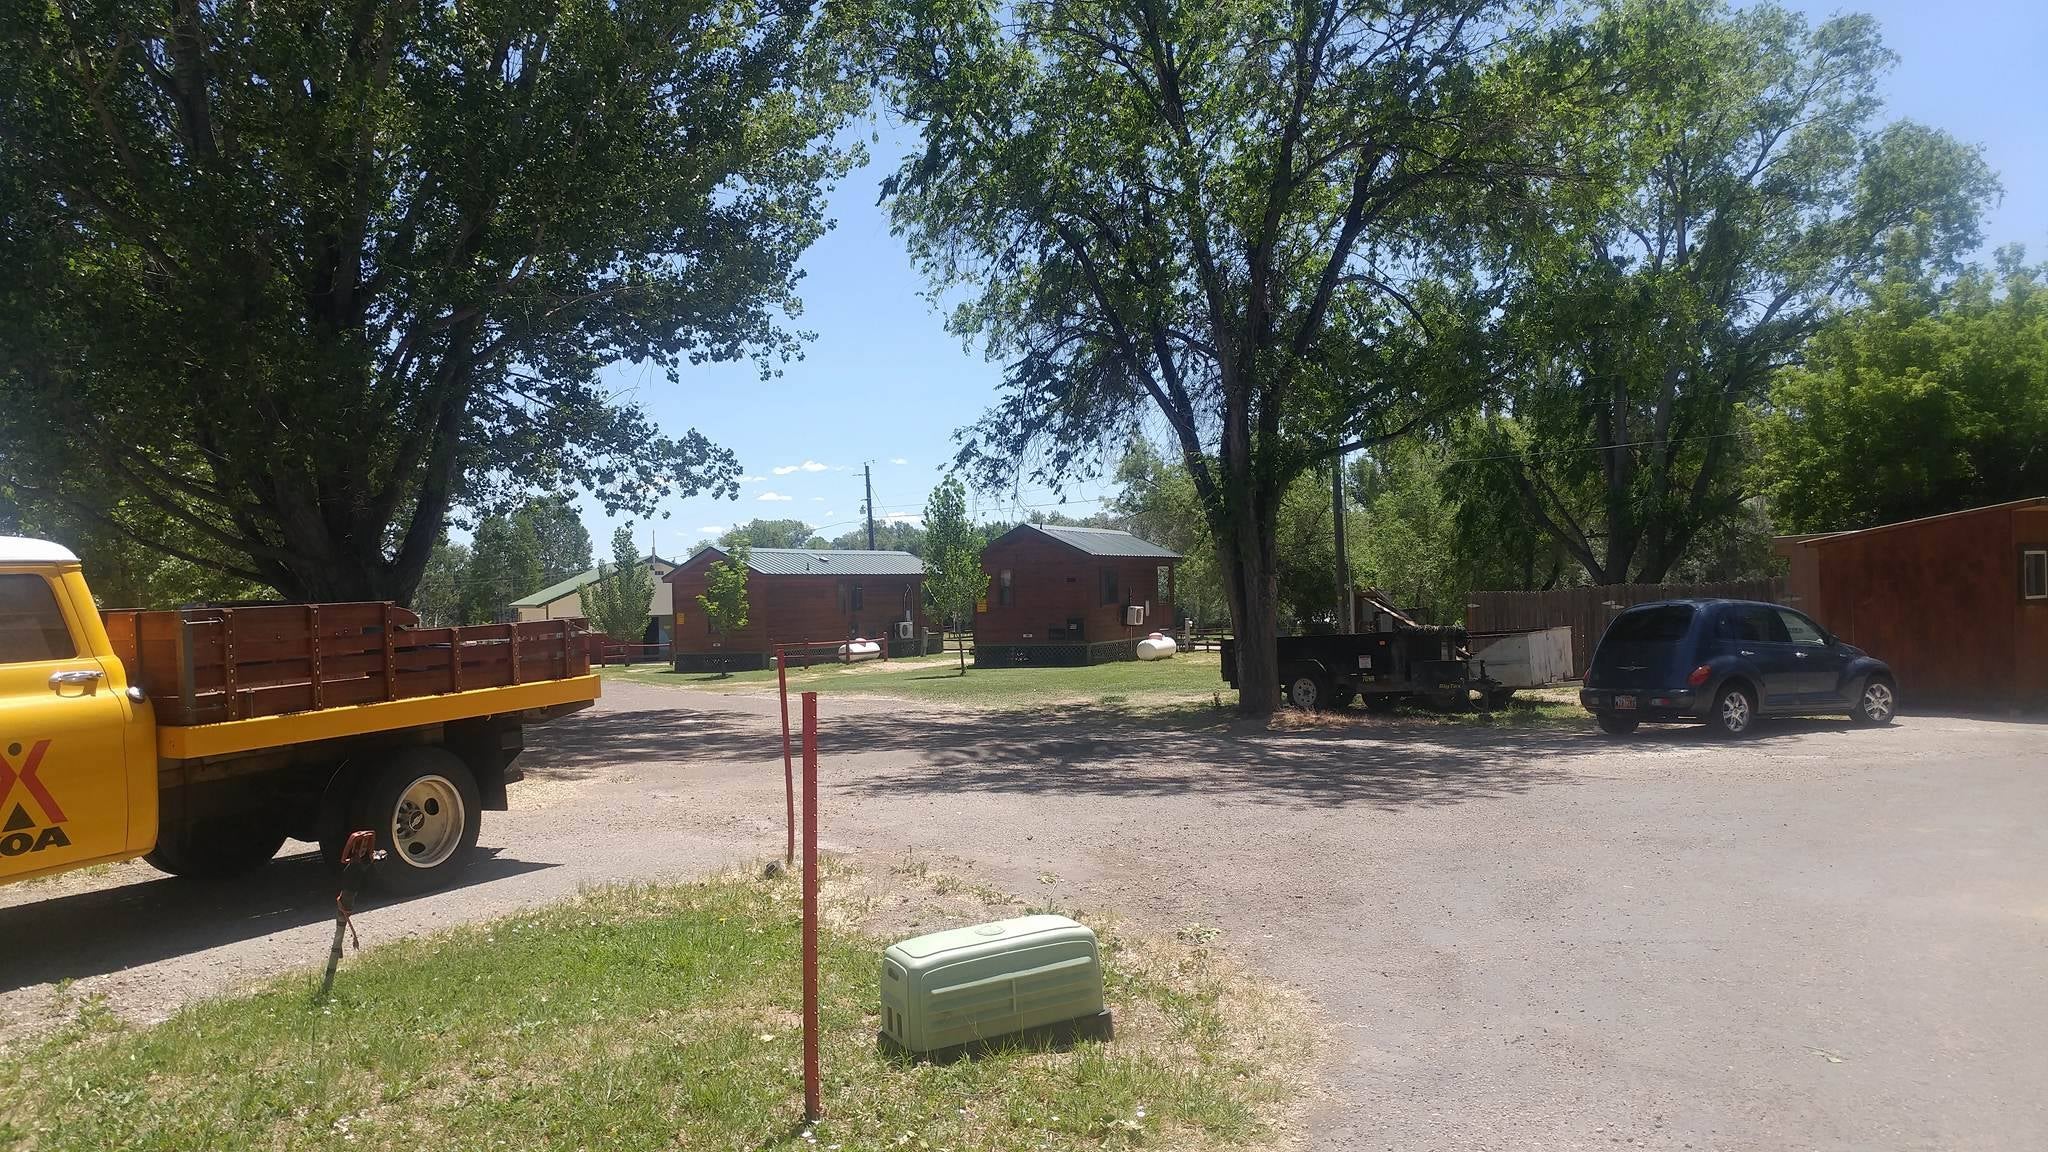 Camper submitted image from Vernal / Dinosaurland KOA - 2